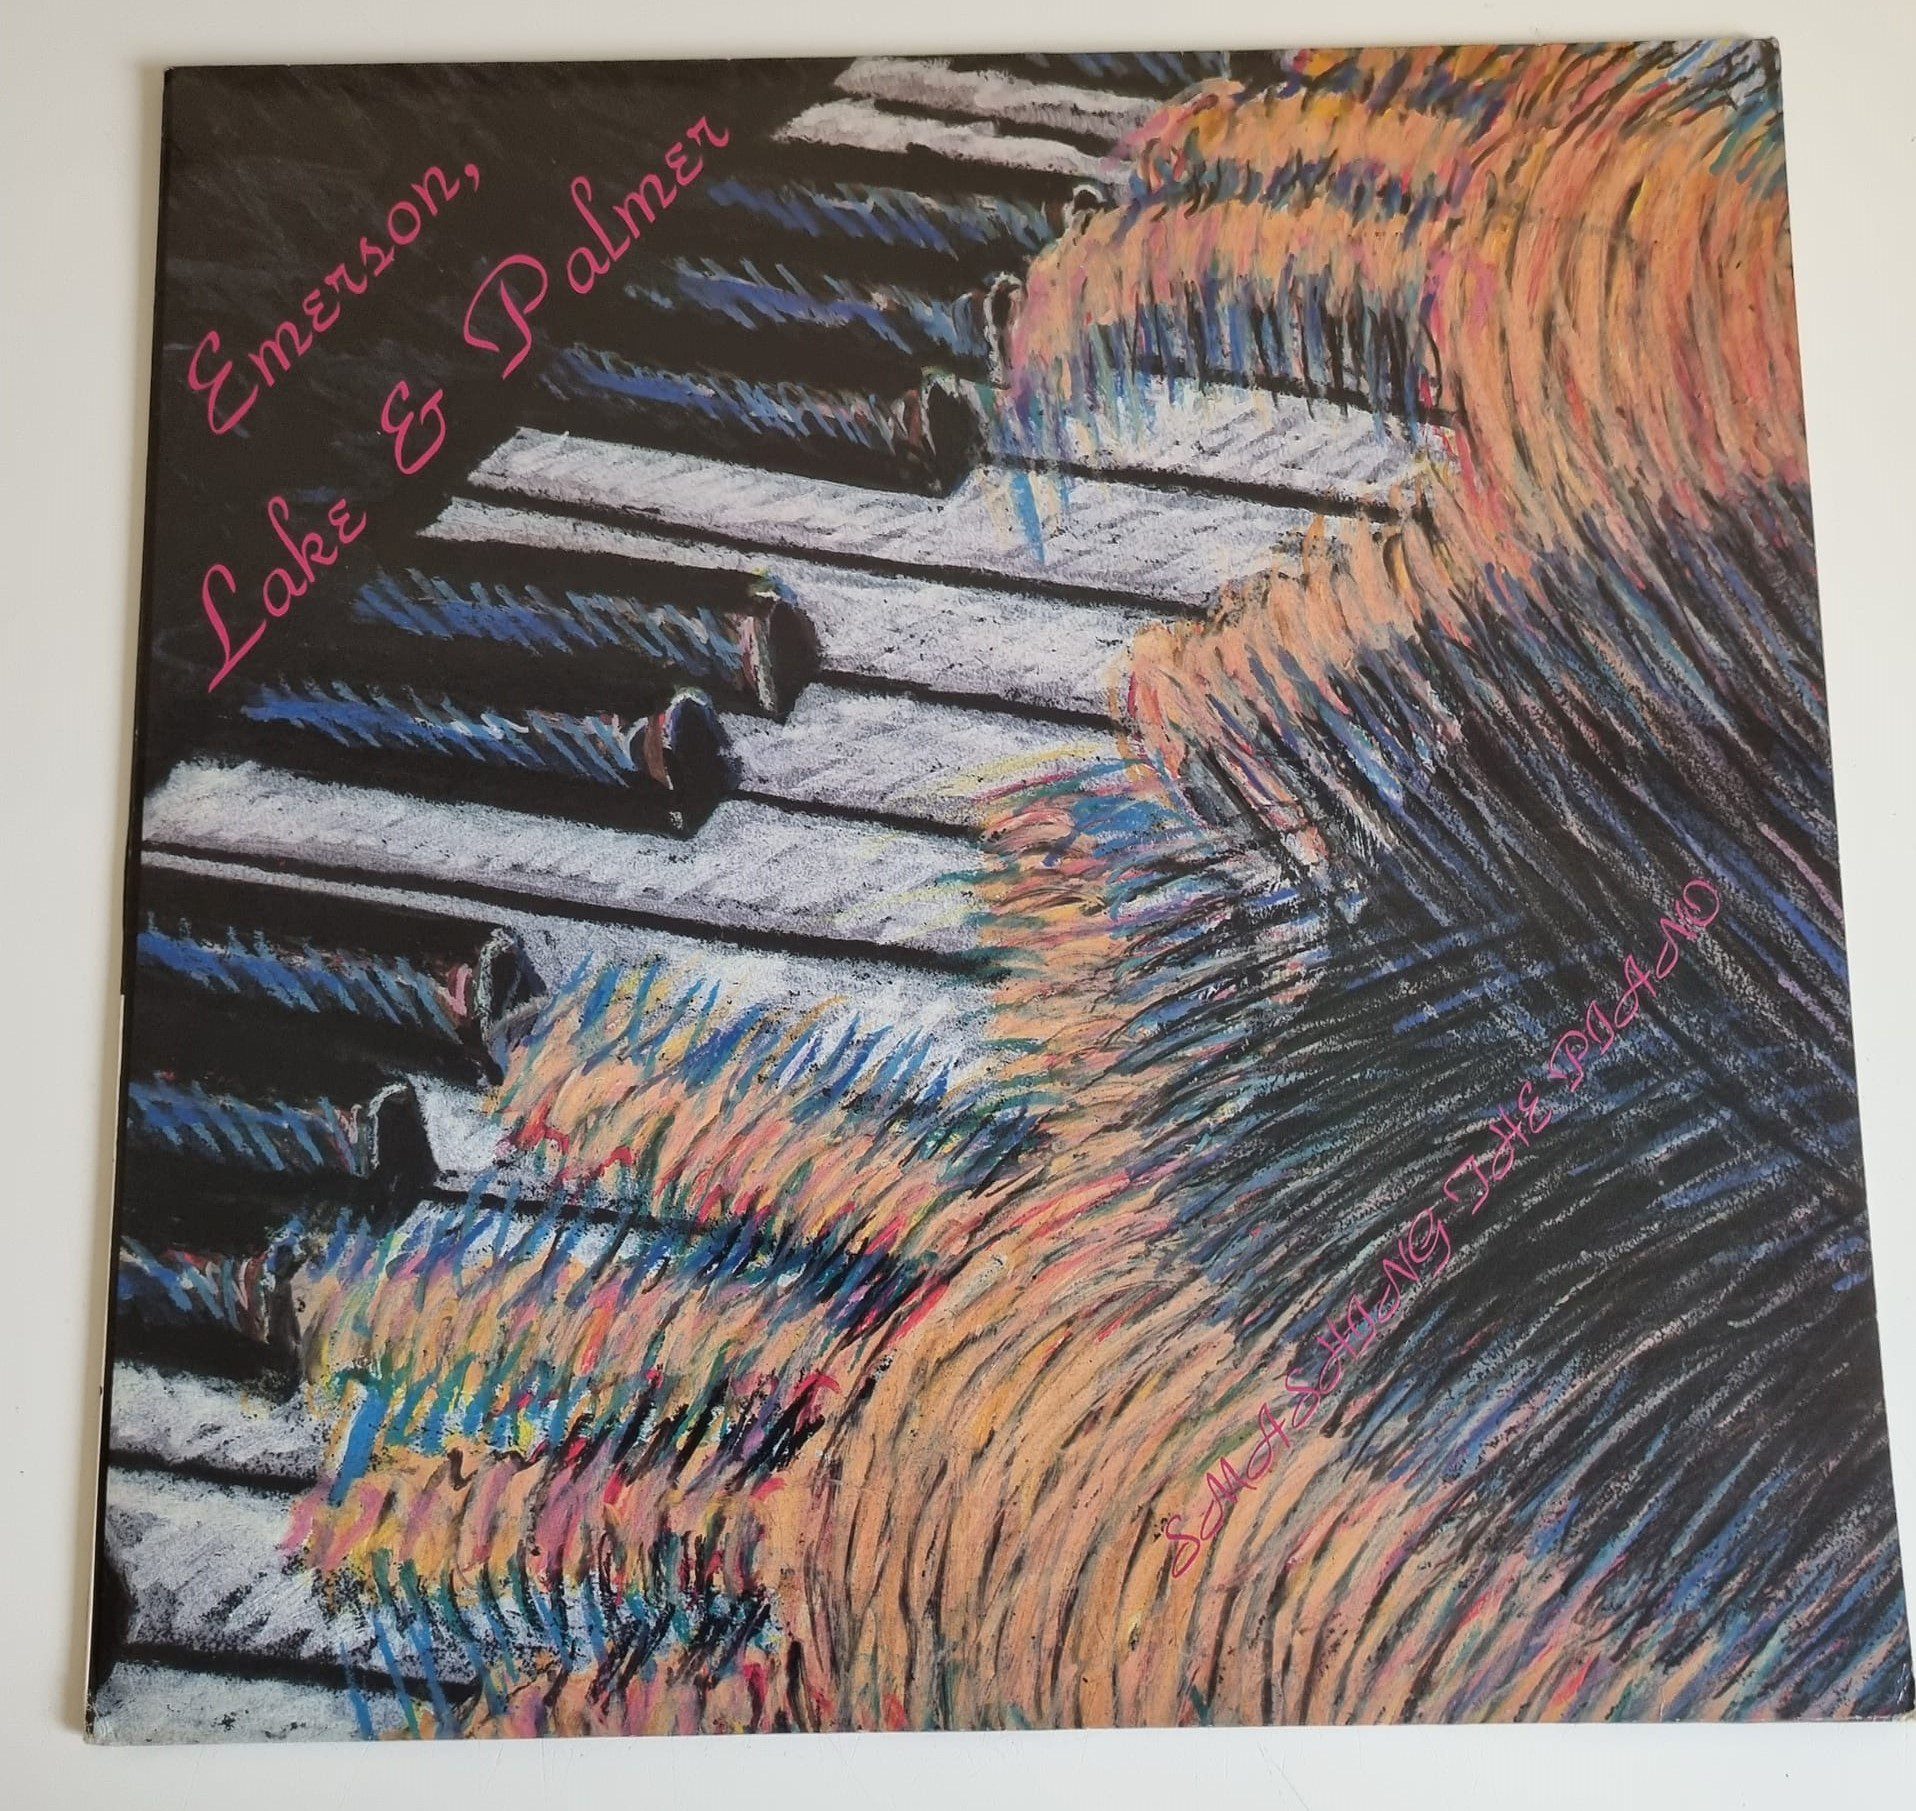 Buy this rare Emerson Lake & Palmer record by clicking here